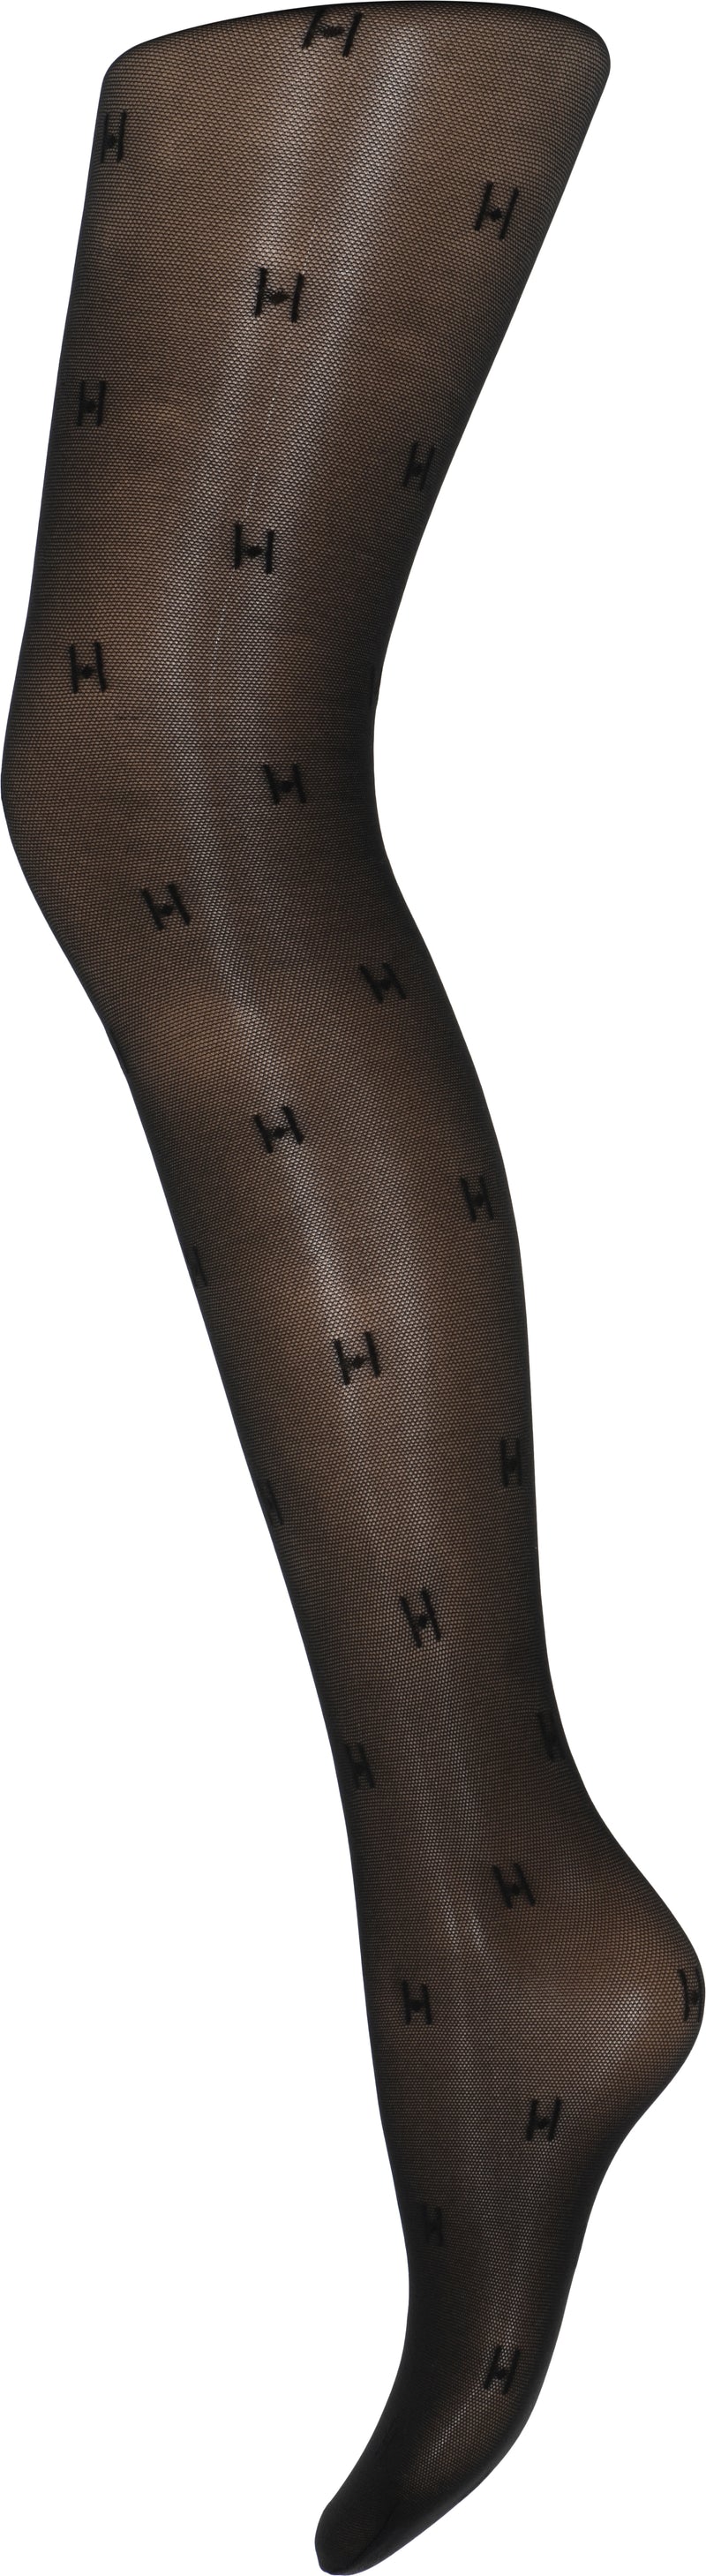 HYPE THE DETAIL - TIGHT H-LOGO 16017-77-1100